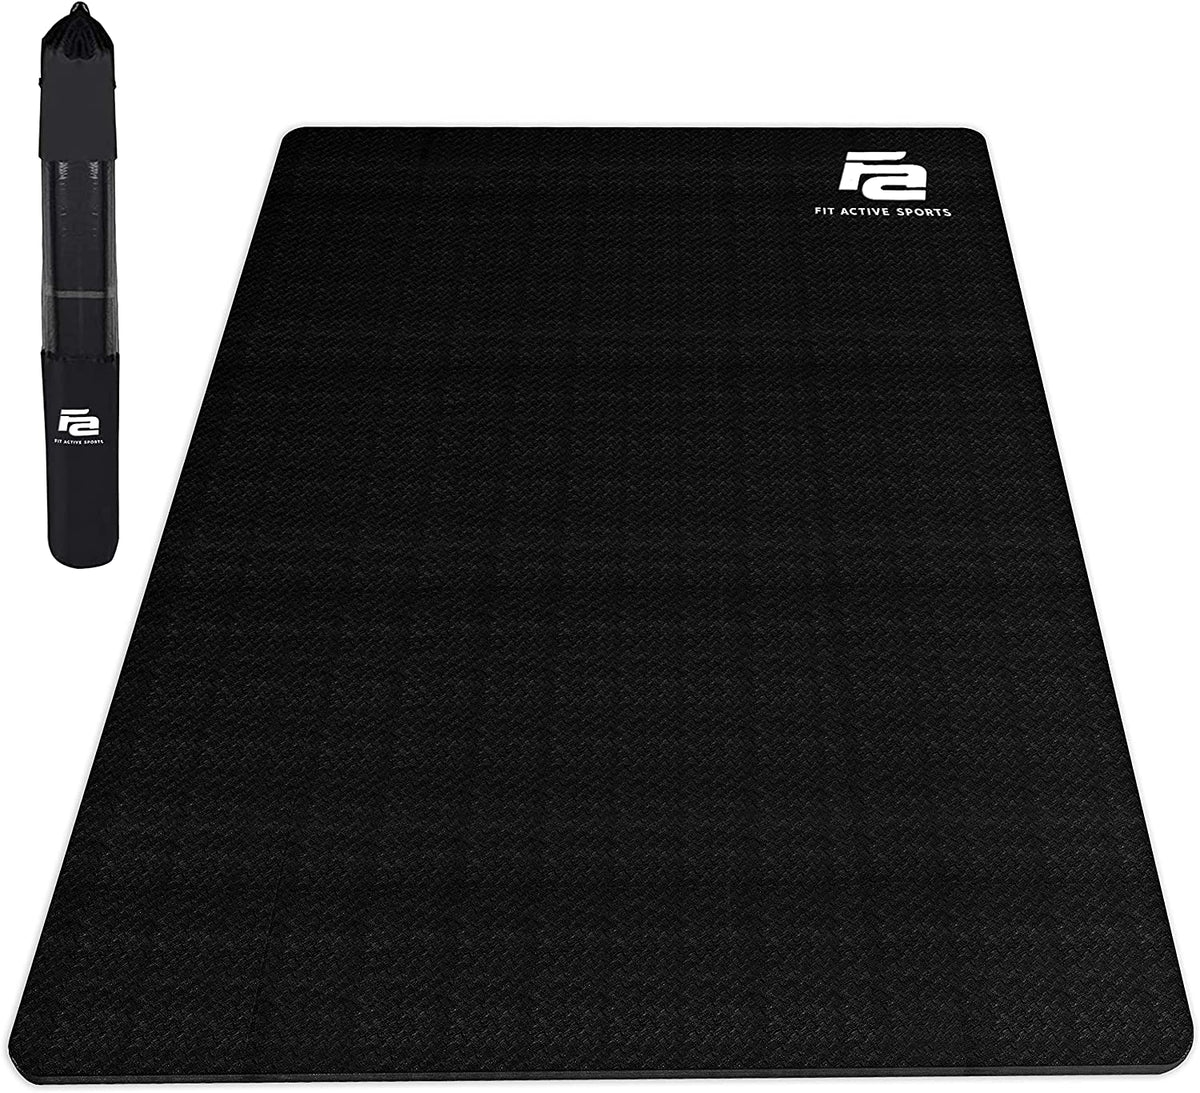 ActiveGear Extra Large Yoga Mat 10 x 6 ft - 8mm Extra Thick, Durable,  Comfortable, Non-Slip & Odorless Premium Yoga and Pilates Mat for Home Gym